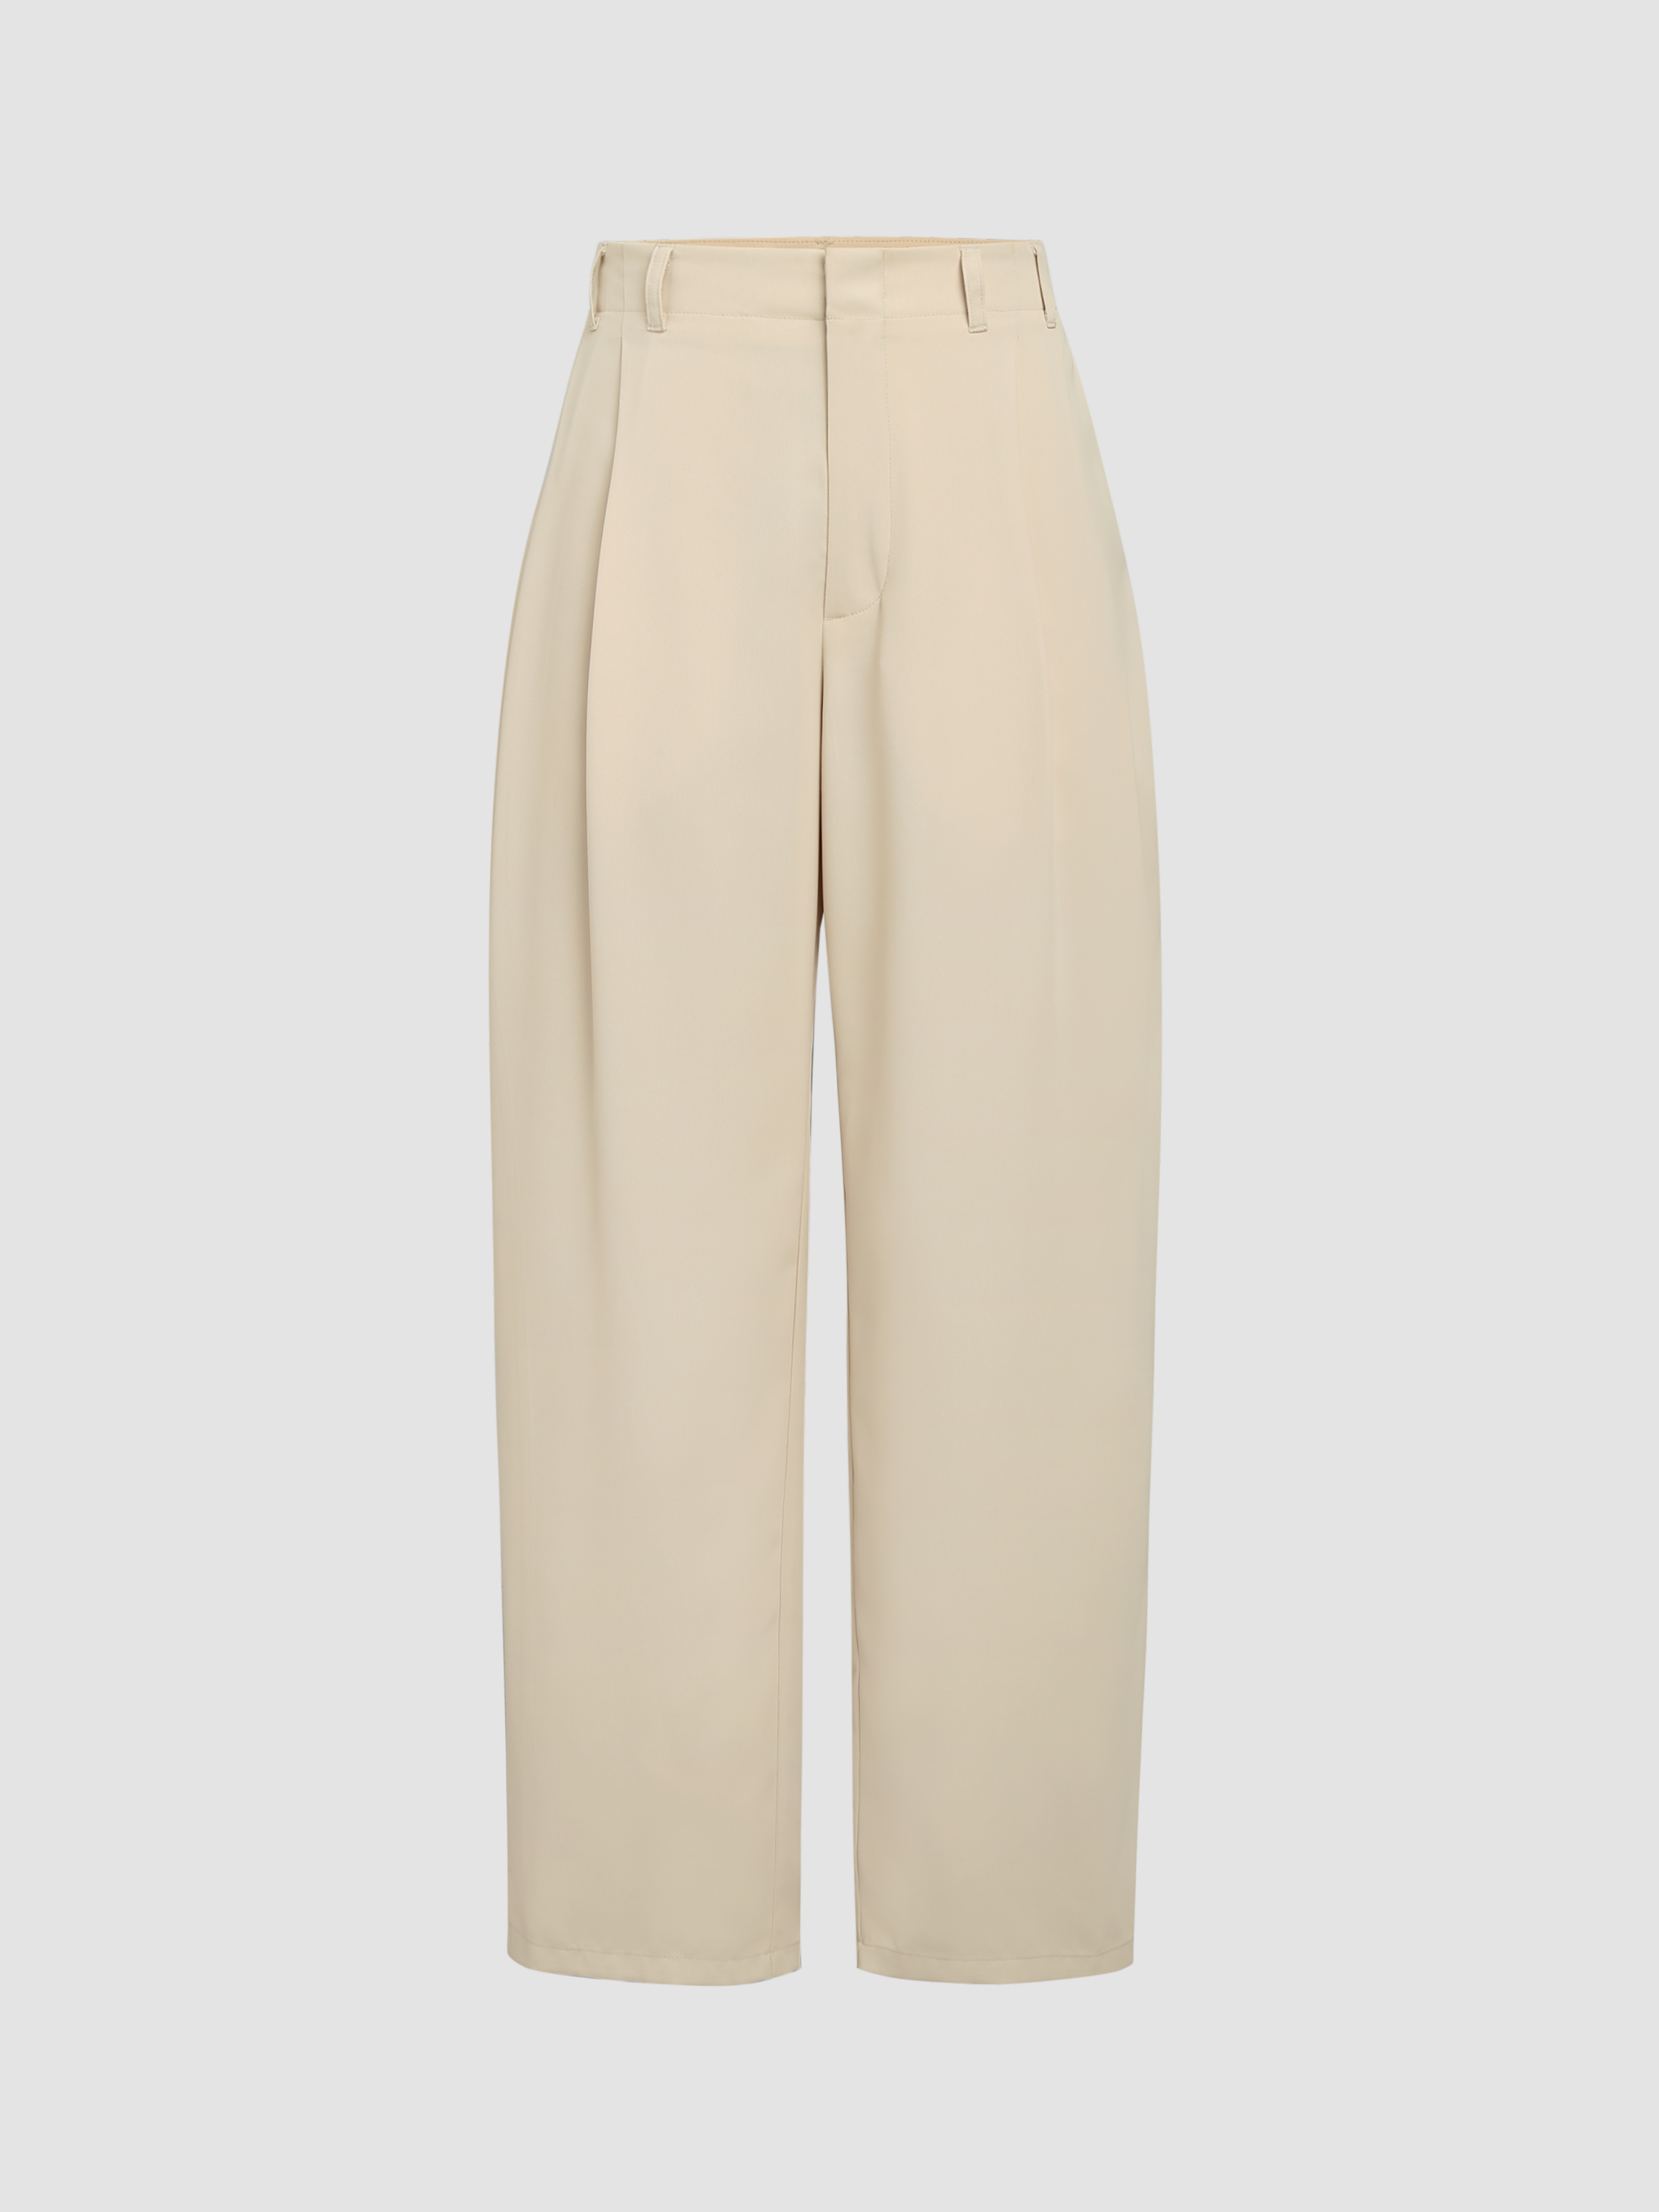 THE FATED RUBY TAPERED - Trousers - sand/nude - Zalando.ie